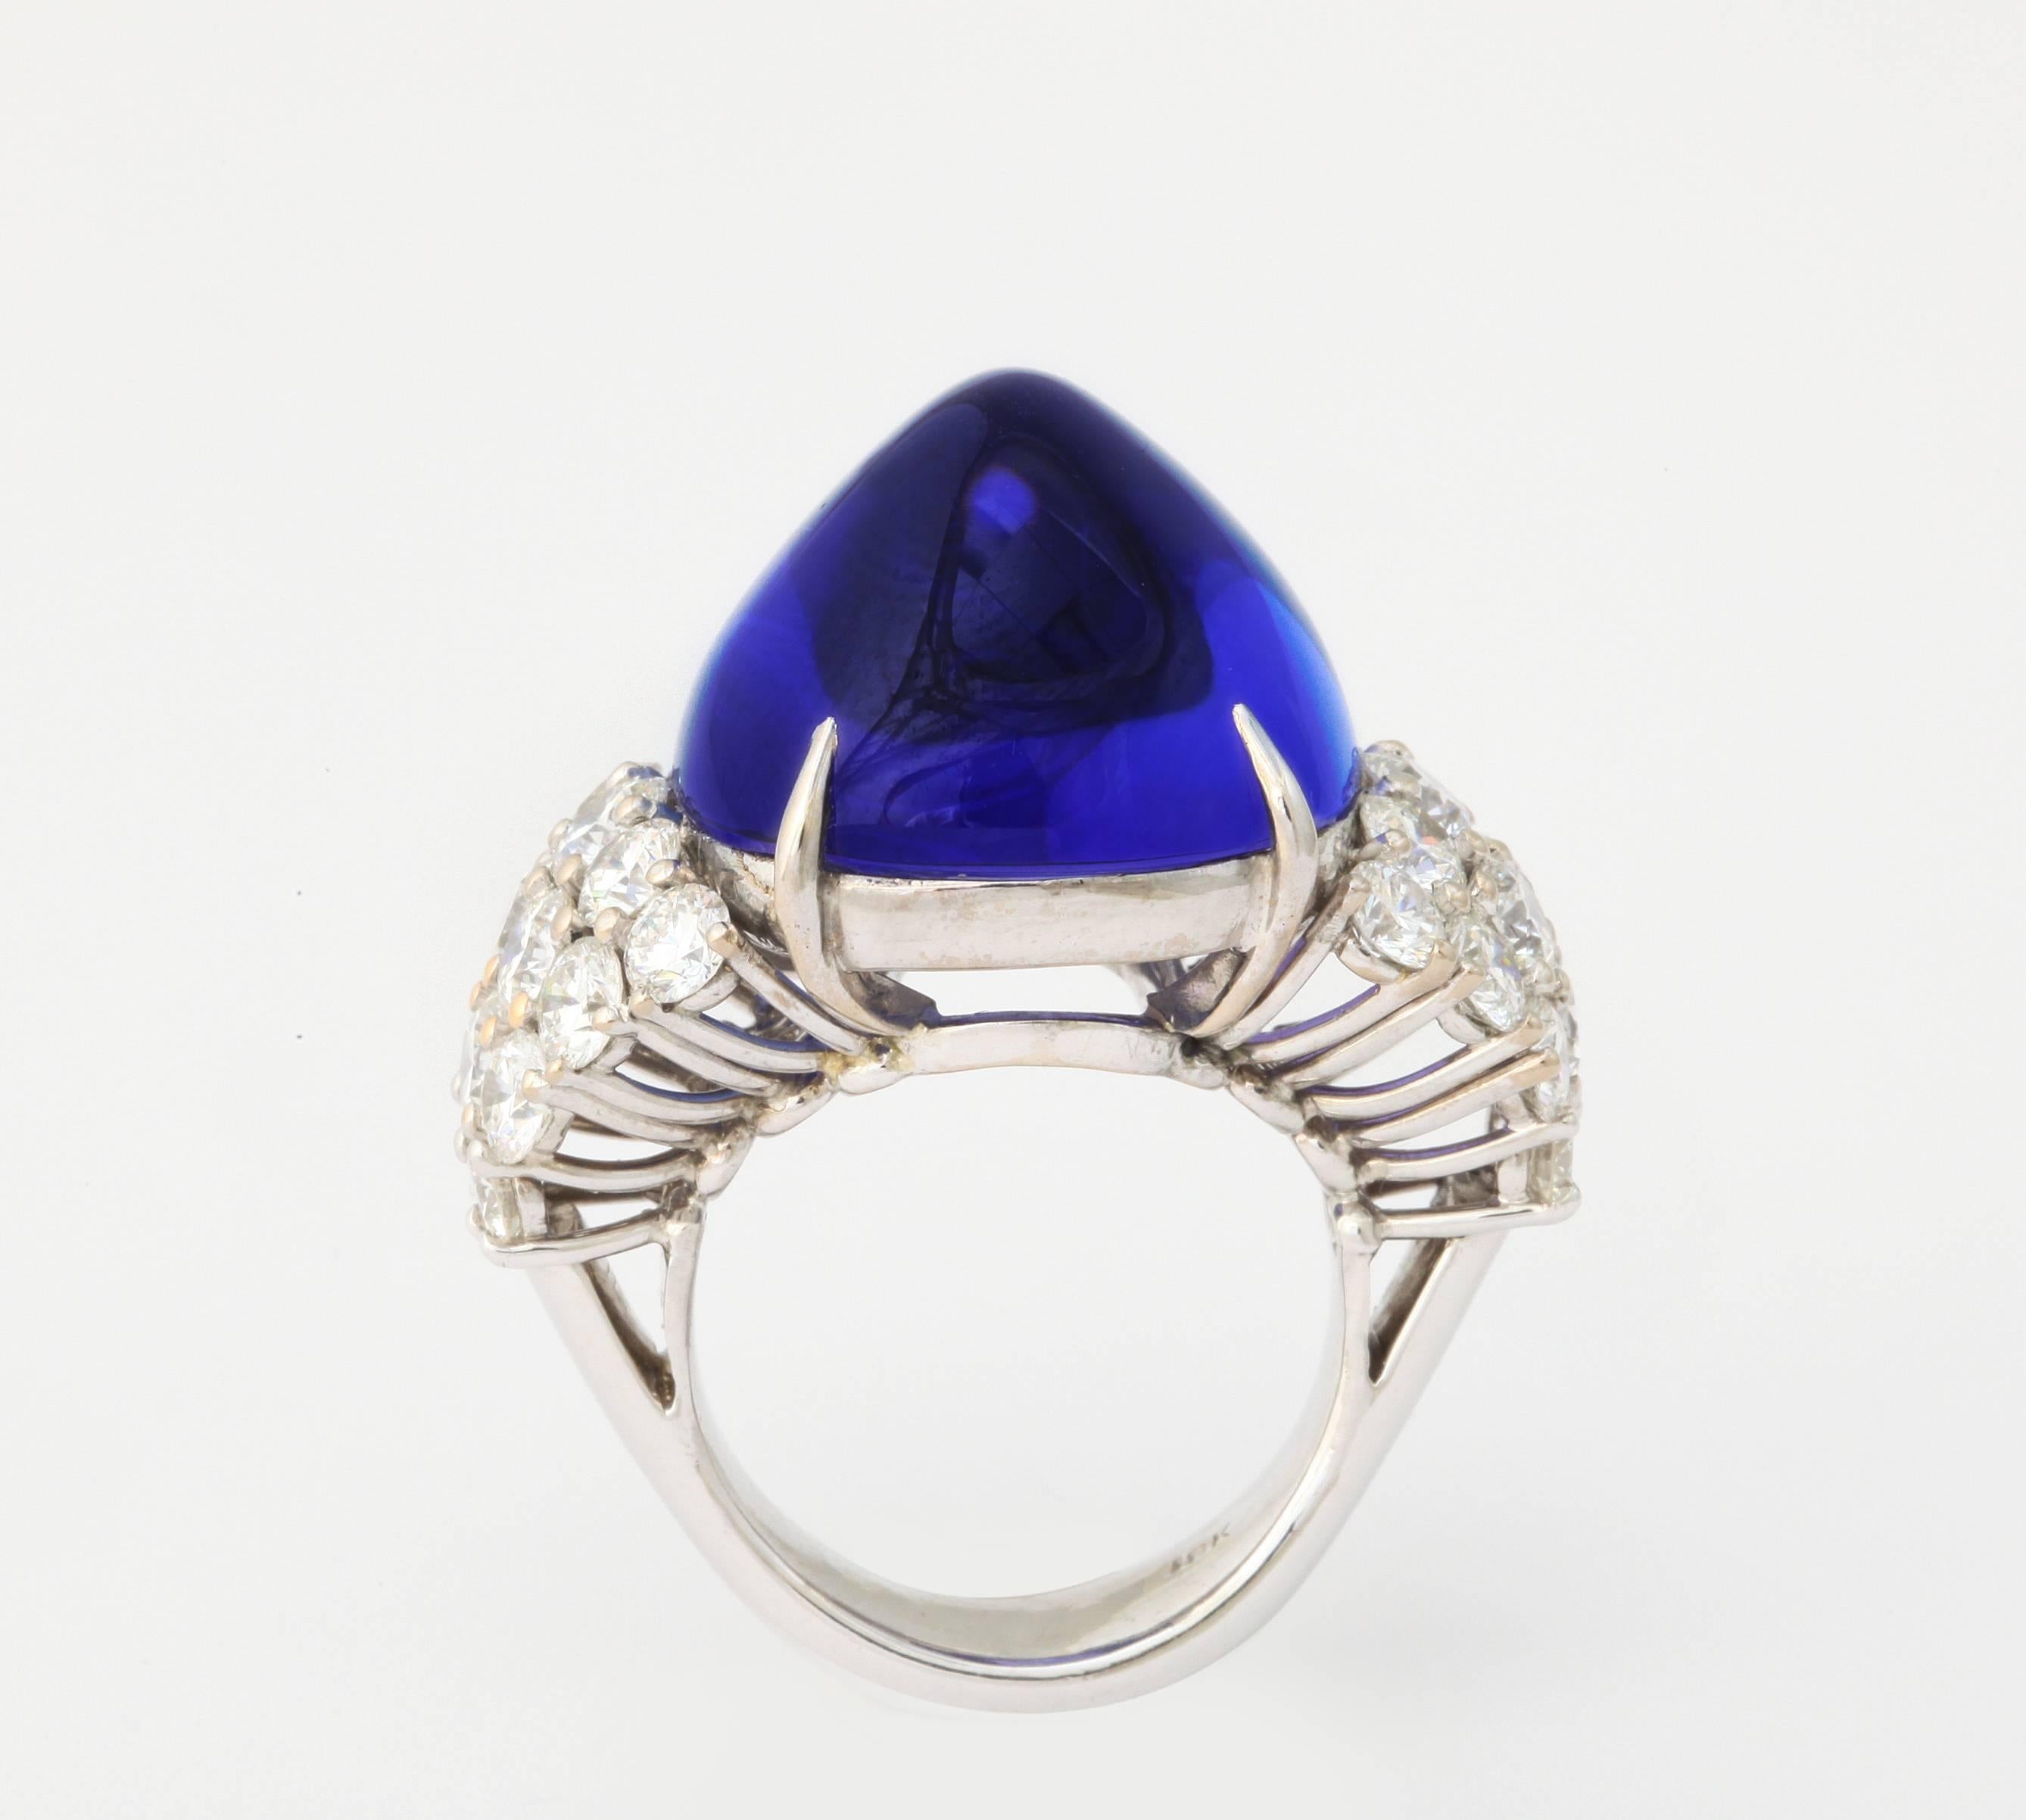 Contemporary Gem Quality Sugarloaf Cut Tanzanite and Diamond Ring For Sale